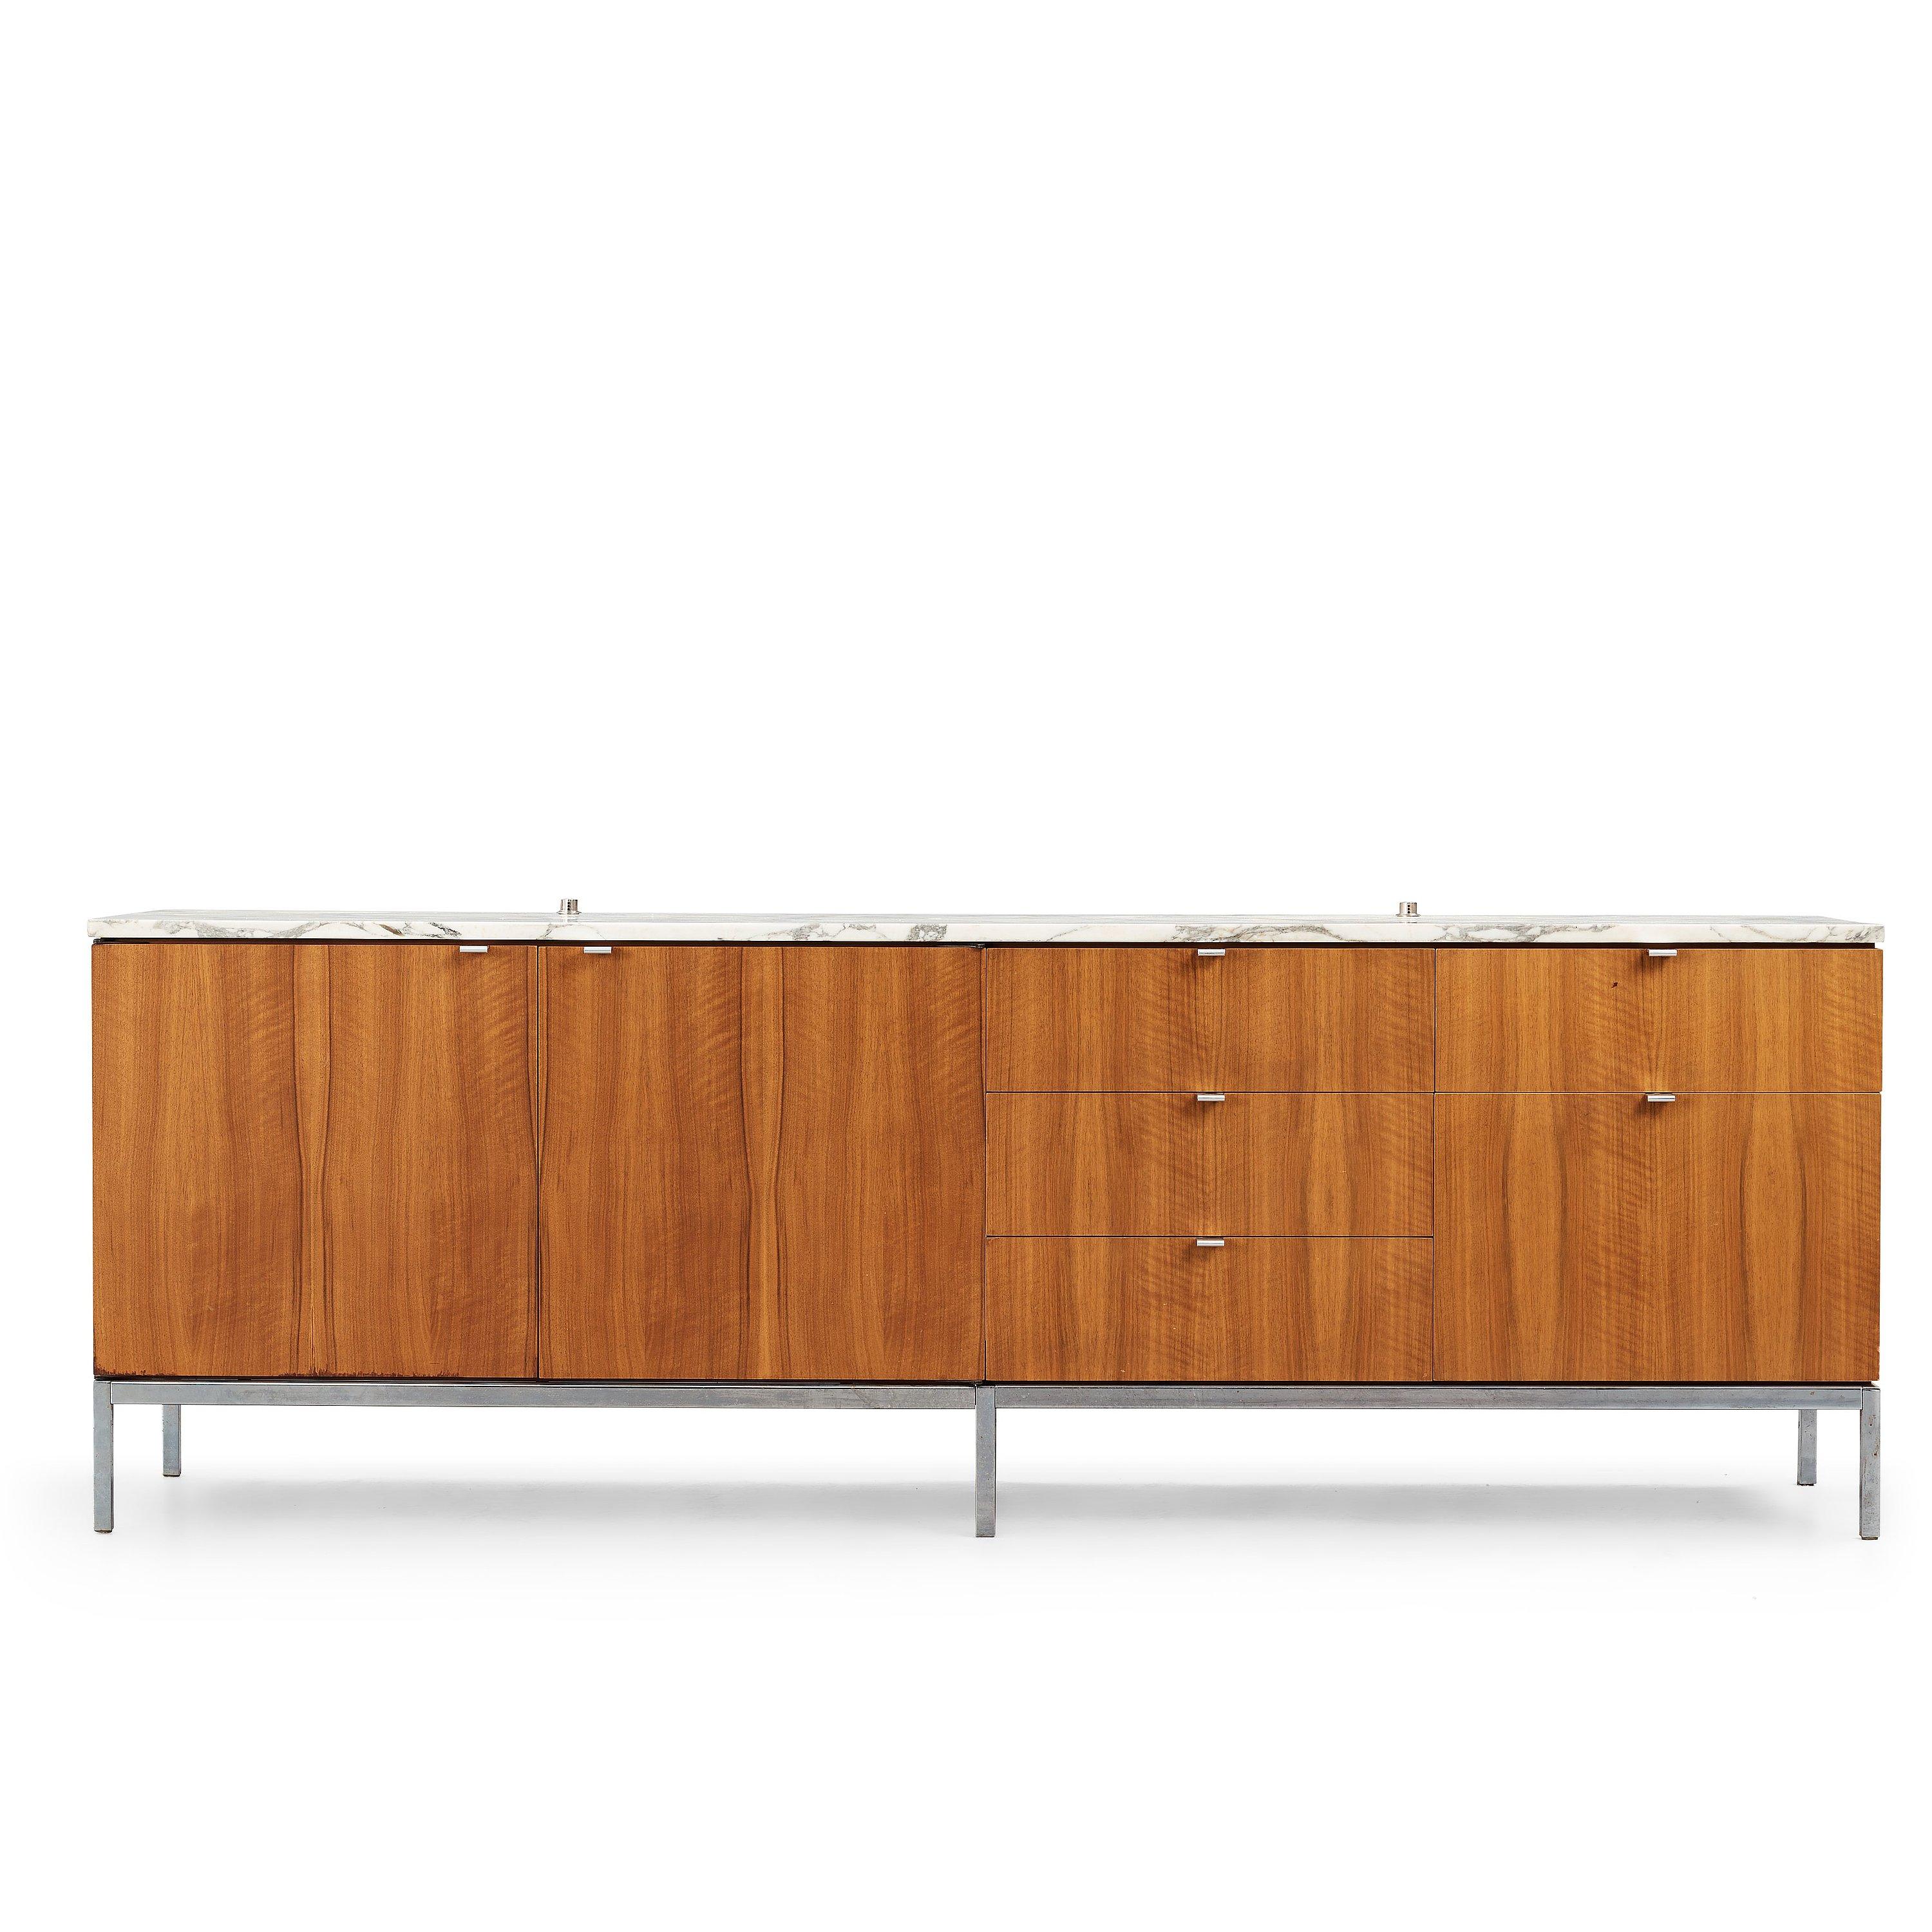 Sideboard designed by Florence Knoll for Knoll International, executed on license by Nordiska Kompaniet NK Inredningar, Sweden, 1966.

Front and back venered in walnut, marble top, handles and base in chrome plated metal, interior in oak, locks